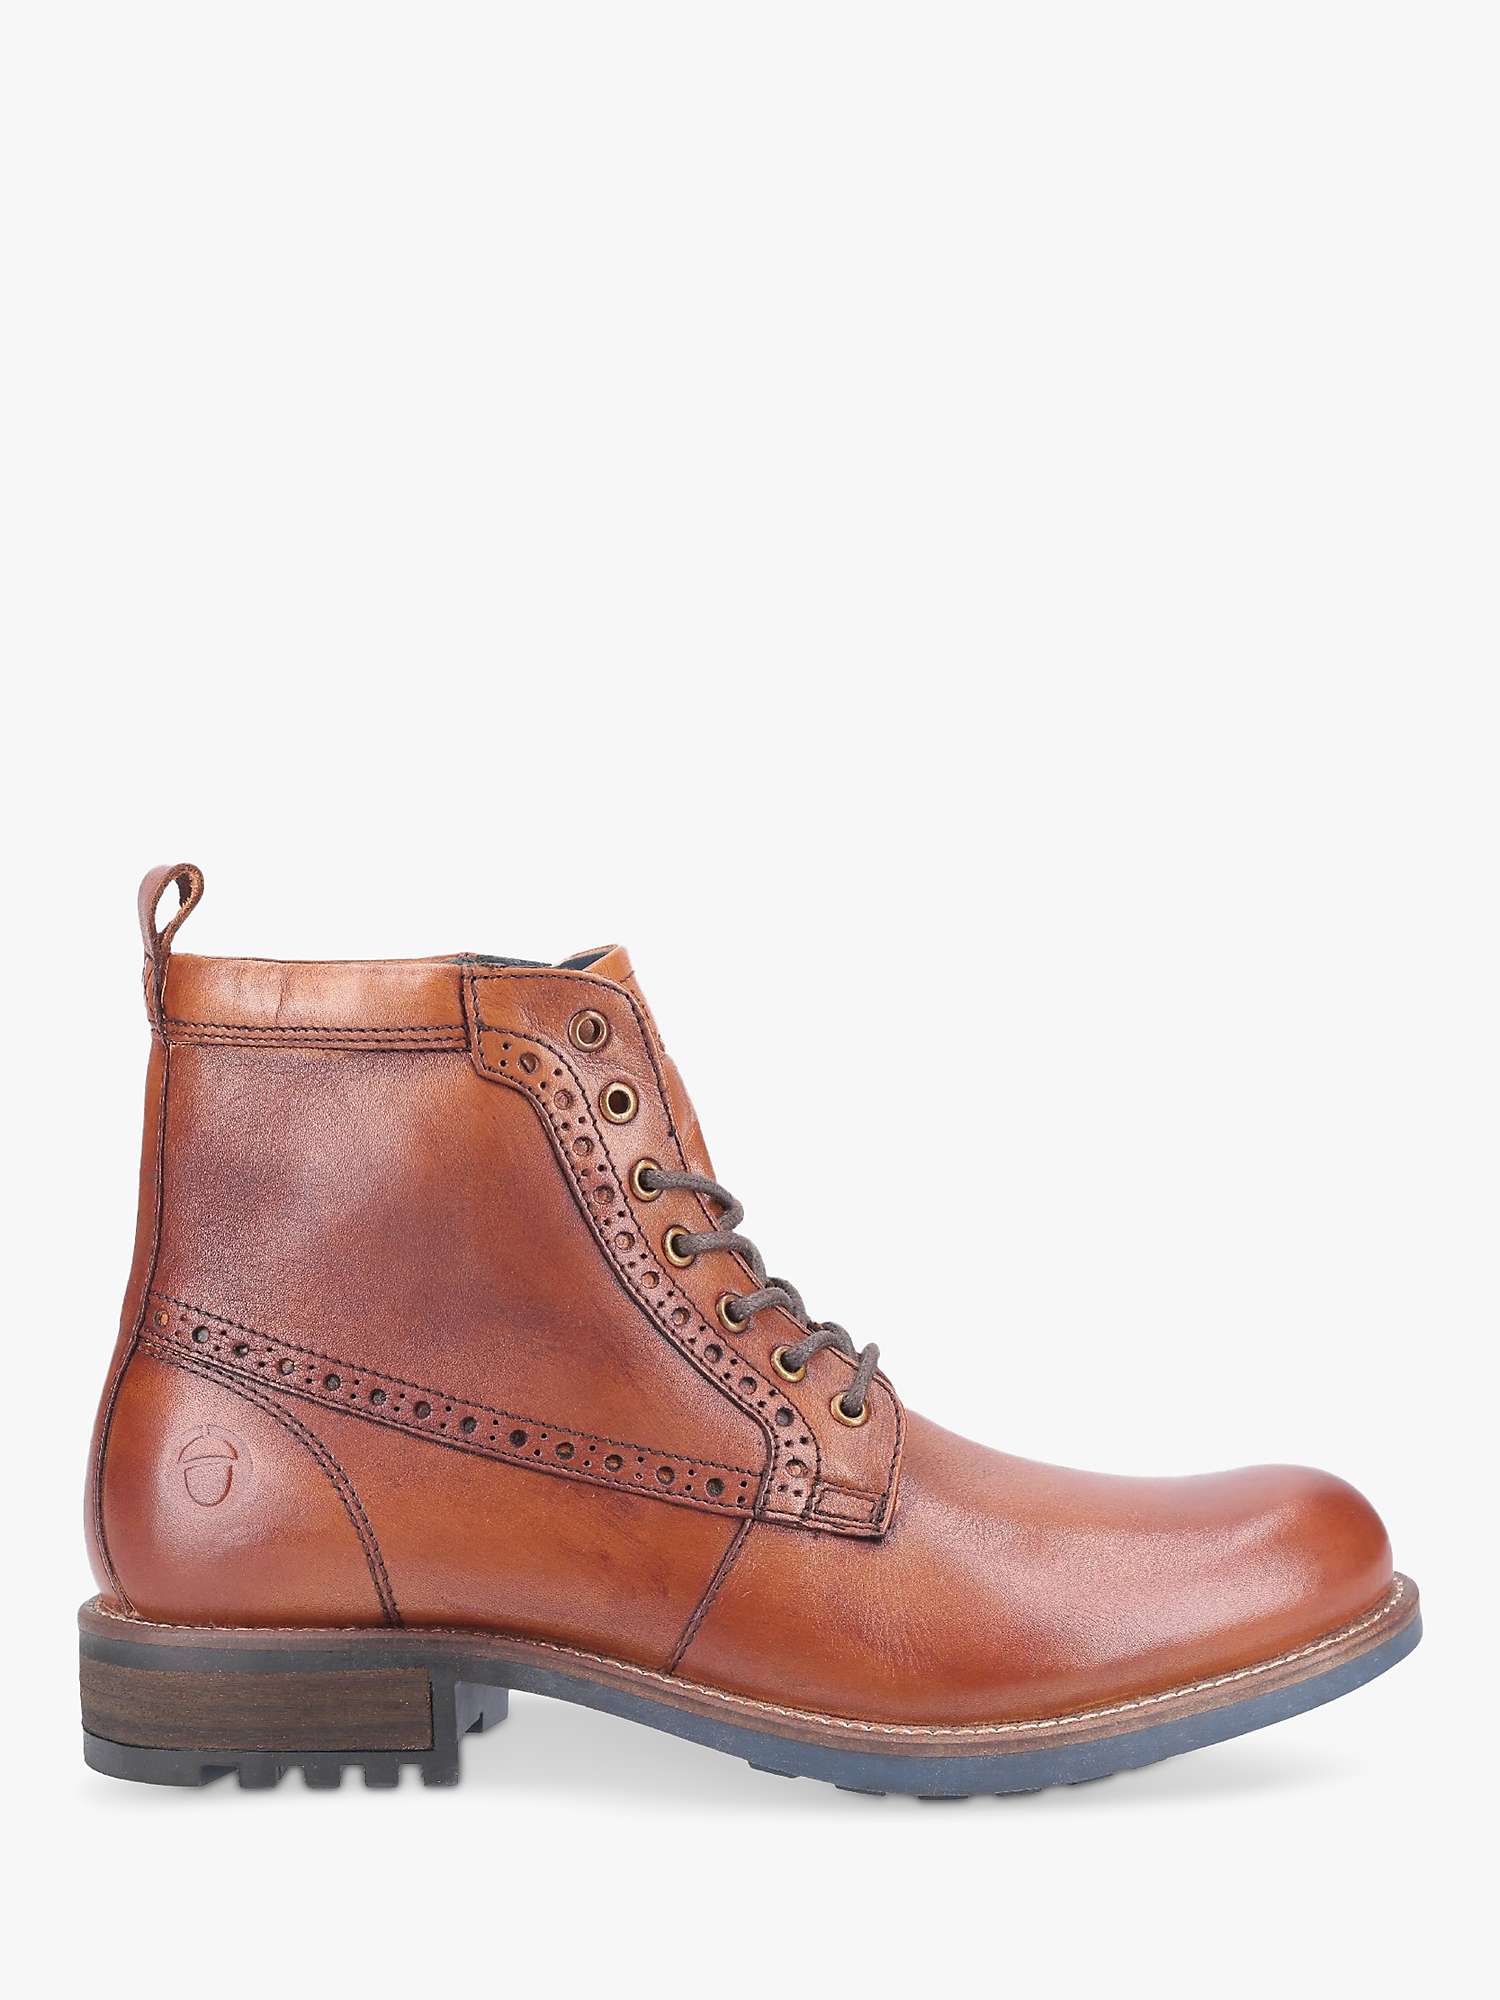 Buy Cotswold Dauntsey Leather Boots, Tan Online at johnlewis.com